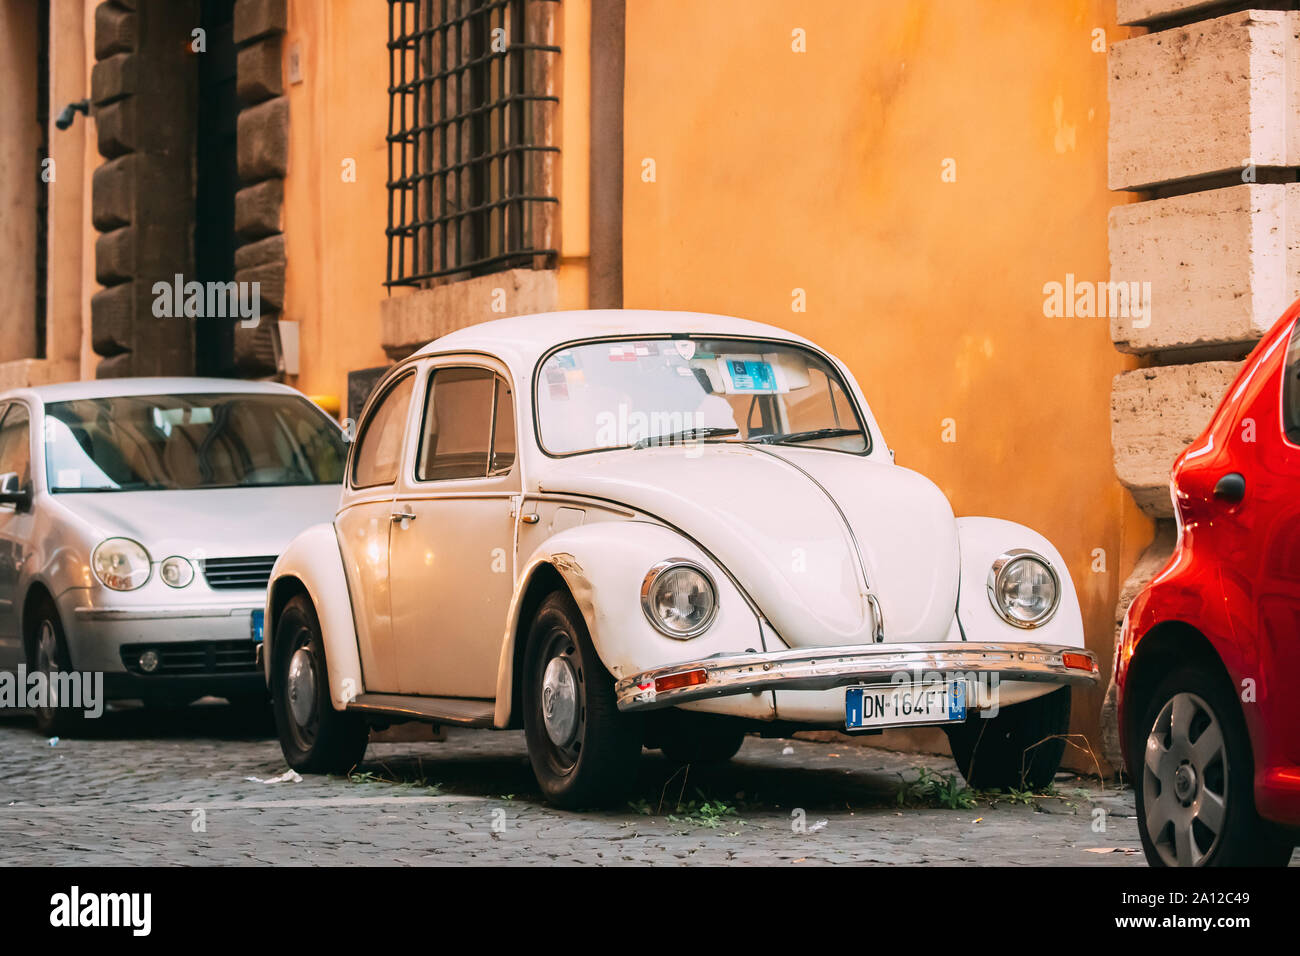 Rome, Italy - October 20, 2018: Old Retro Vintage White Color Volkswagen Beetle Car Parked At Street. Stock Photo